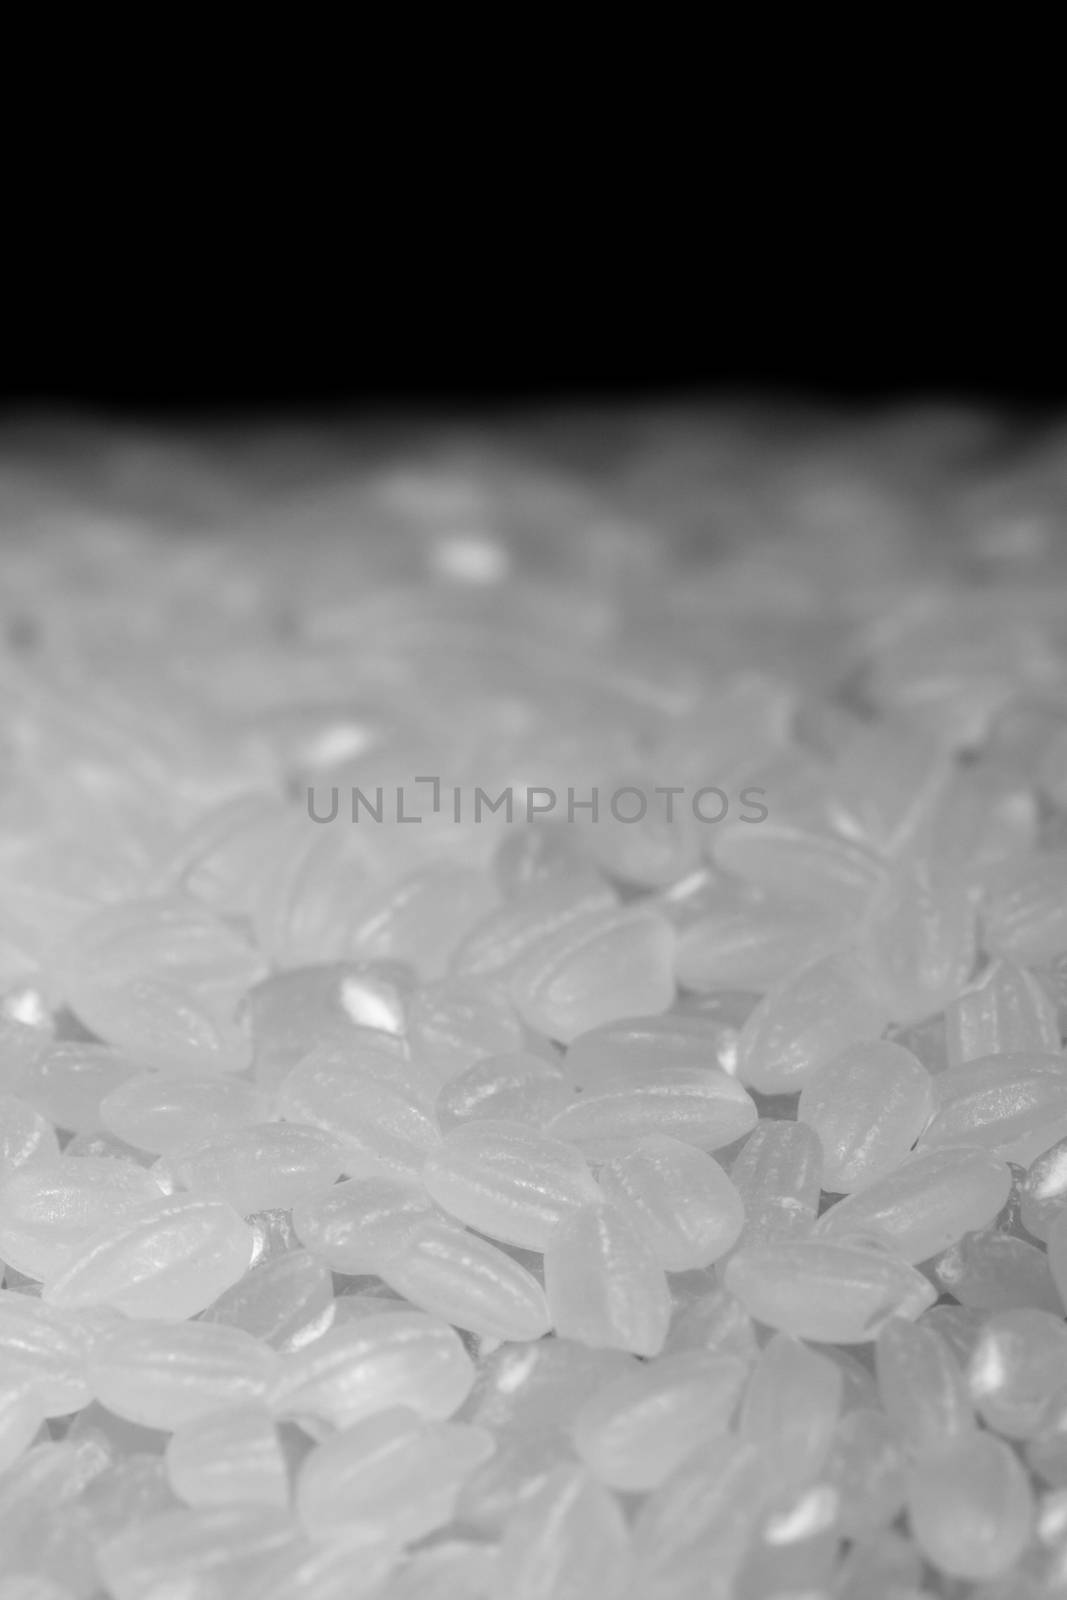 A close up shot of uncooked rice fading into a black background.